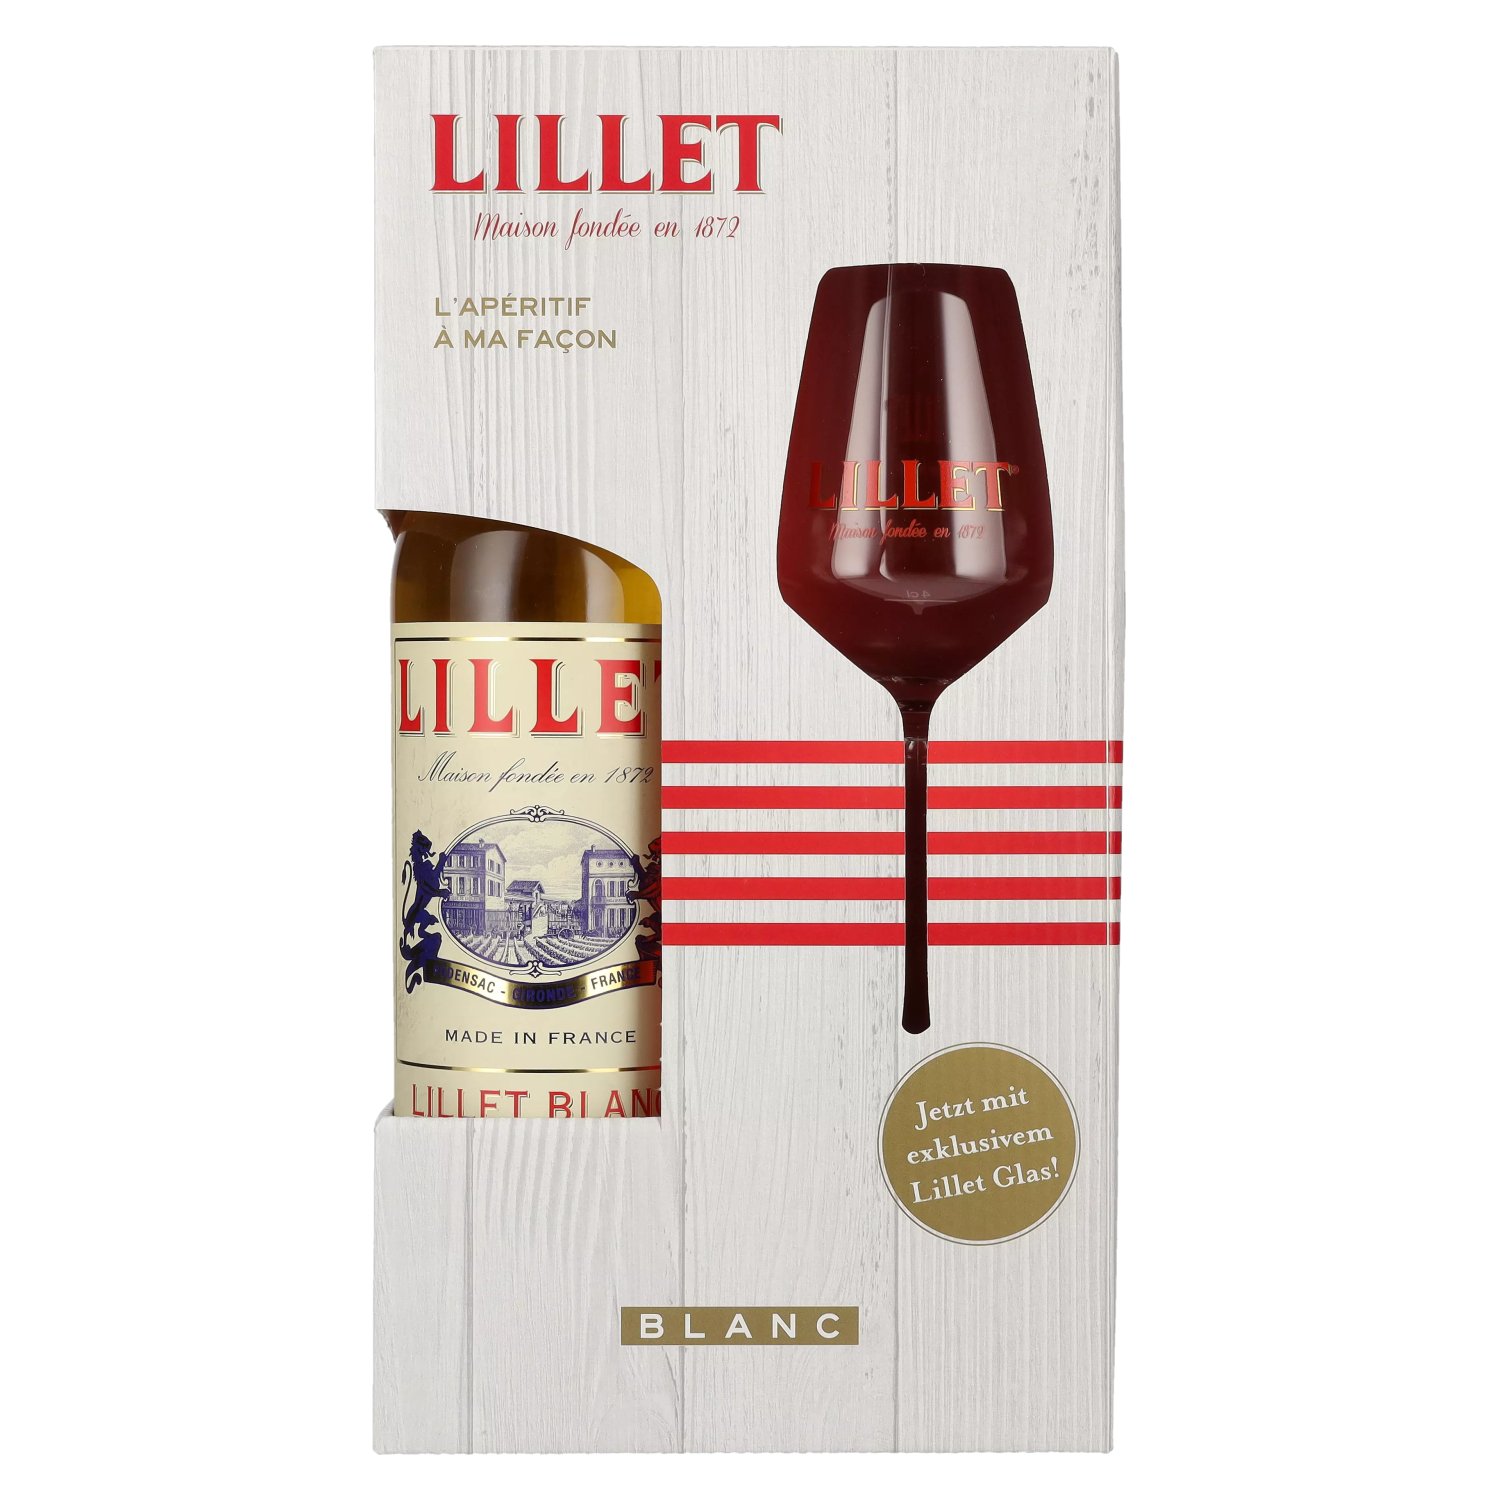 Lillet Giftbox Blanc with Vol. 17% 0,75l glass in